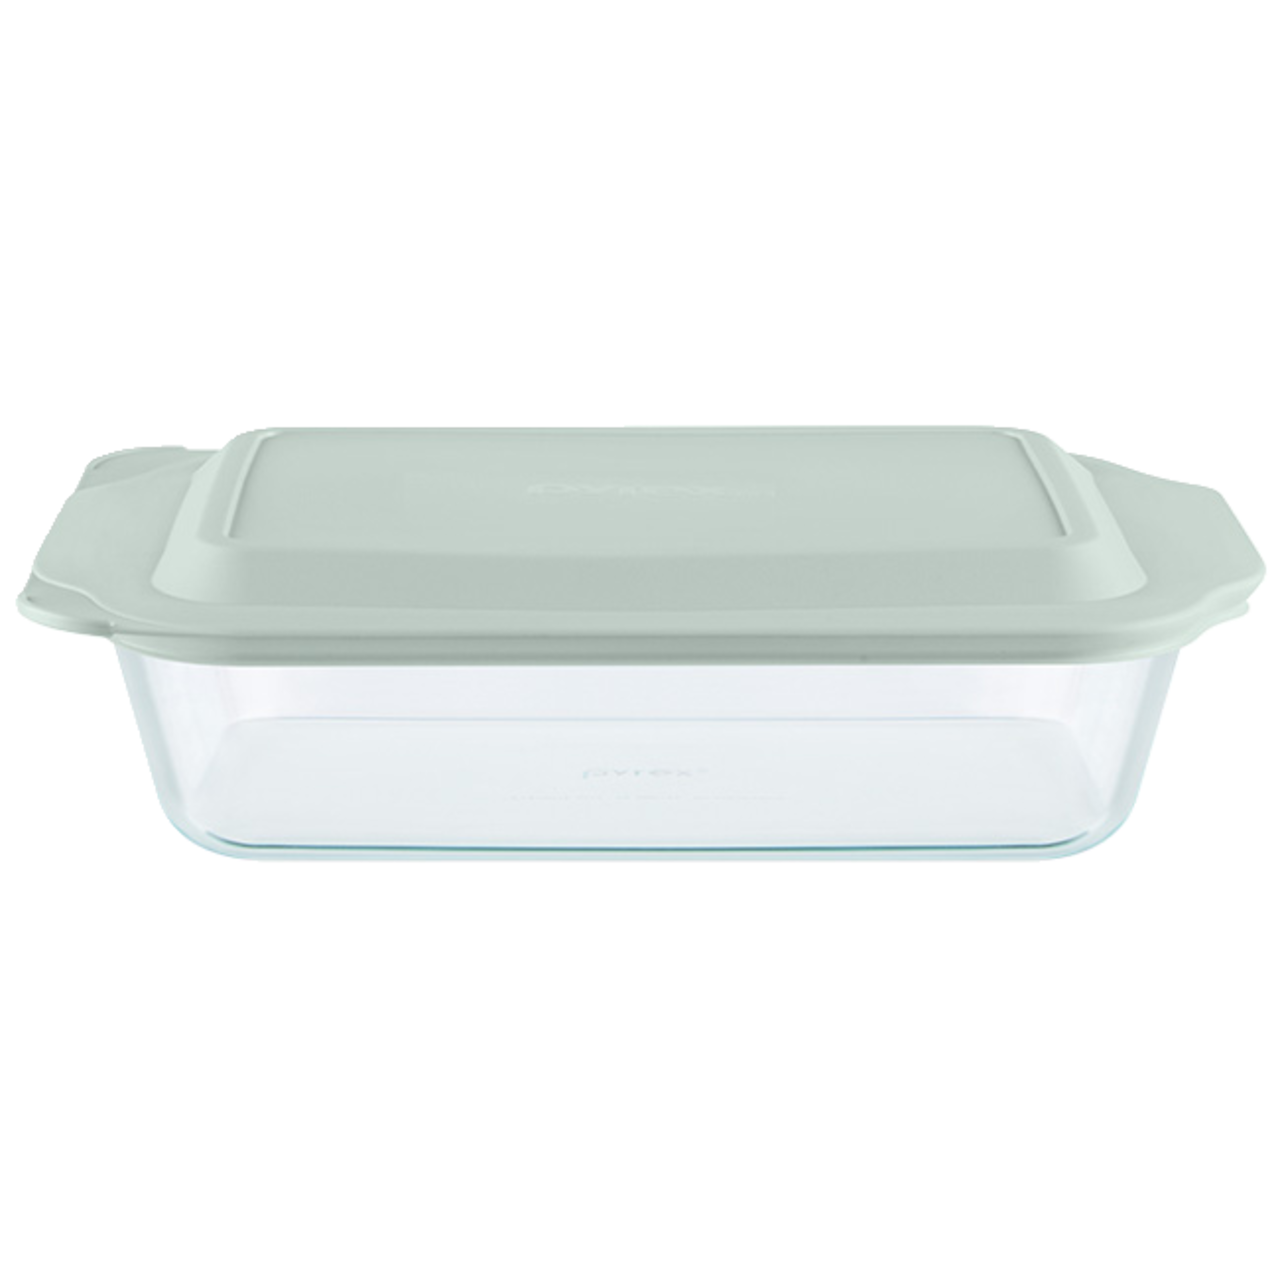 Pyrex Deep 9 in. x 13 in. 2-in-1 Glass Baking Dish with Glass Lid